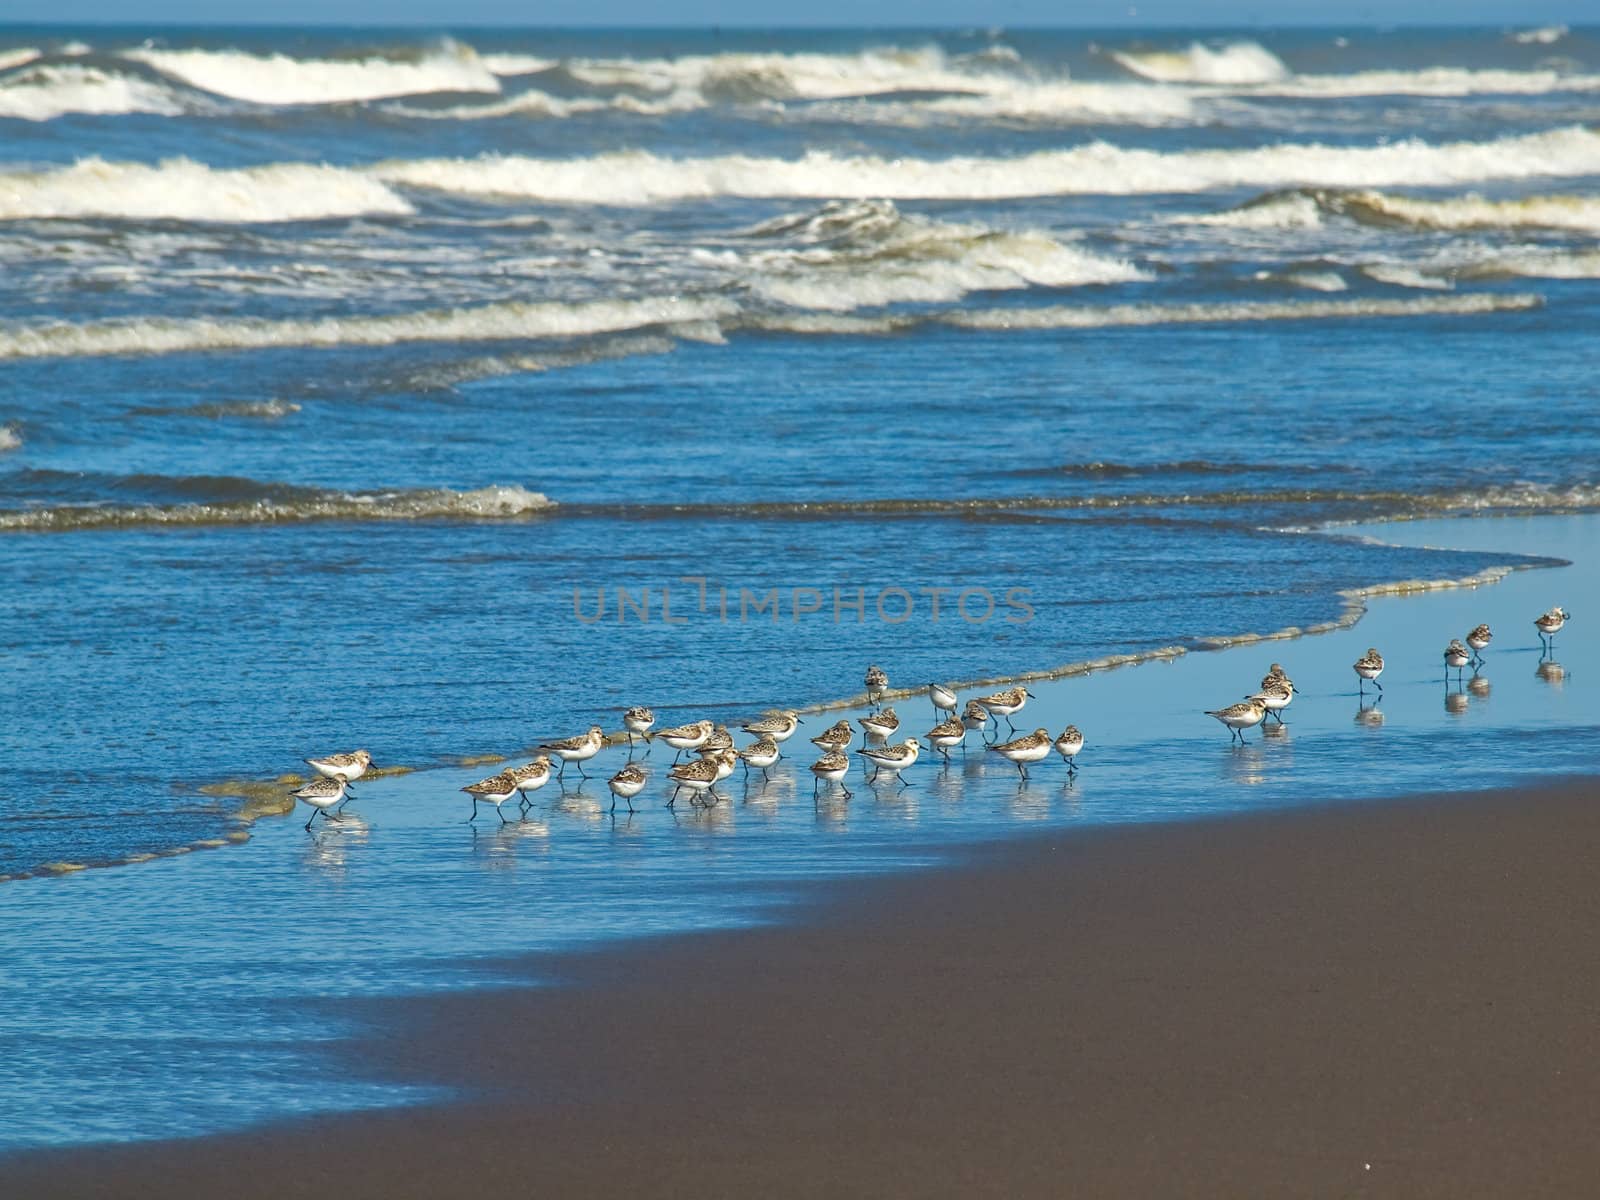 A Flock of Little Brown Seabirds at the Seashore